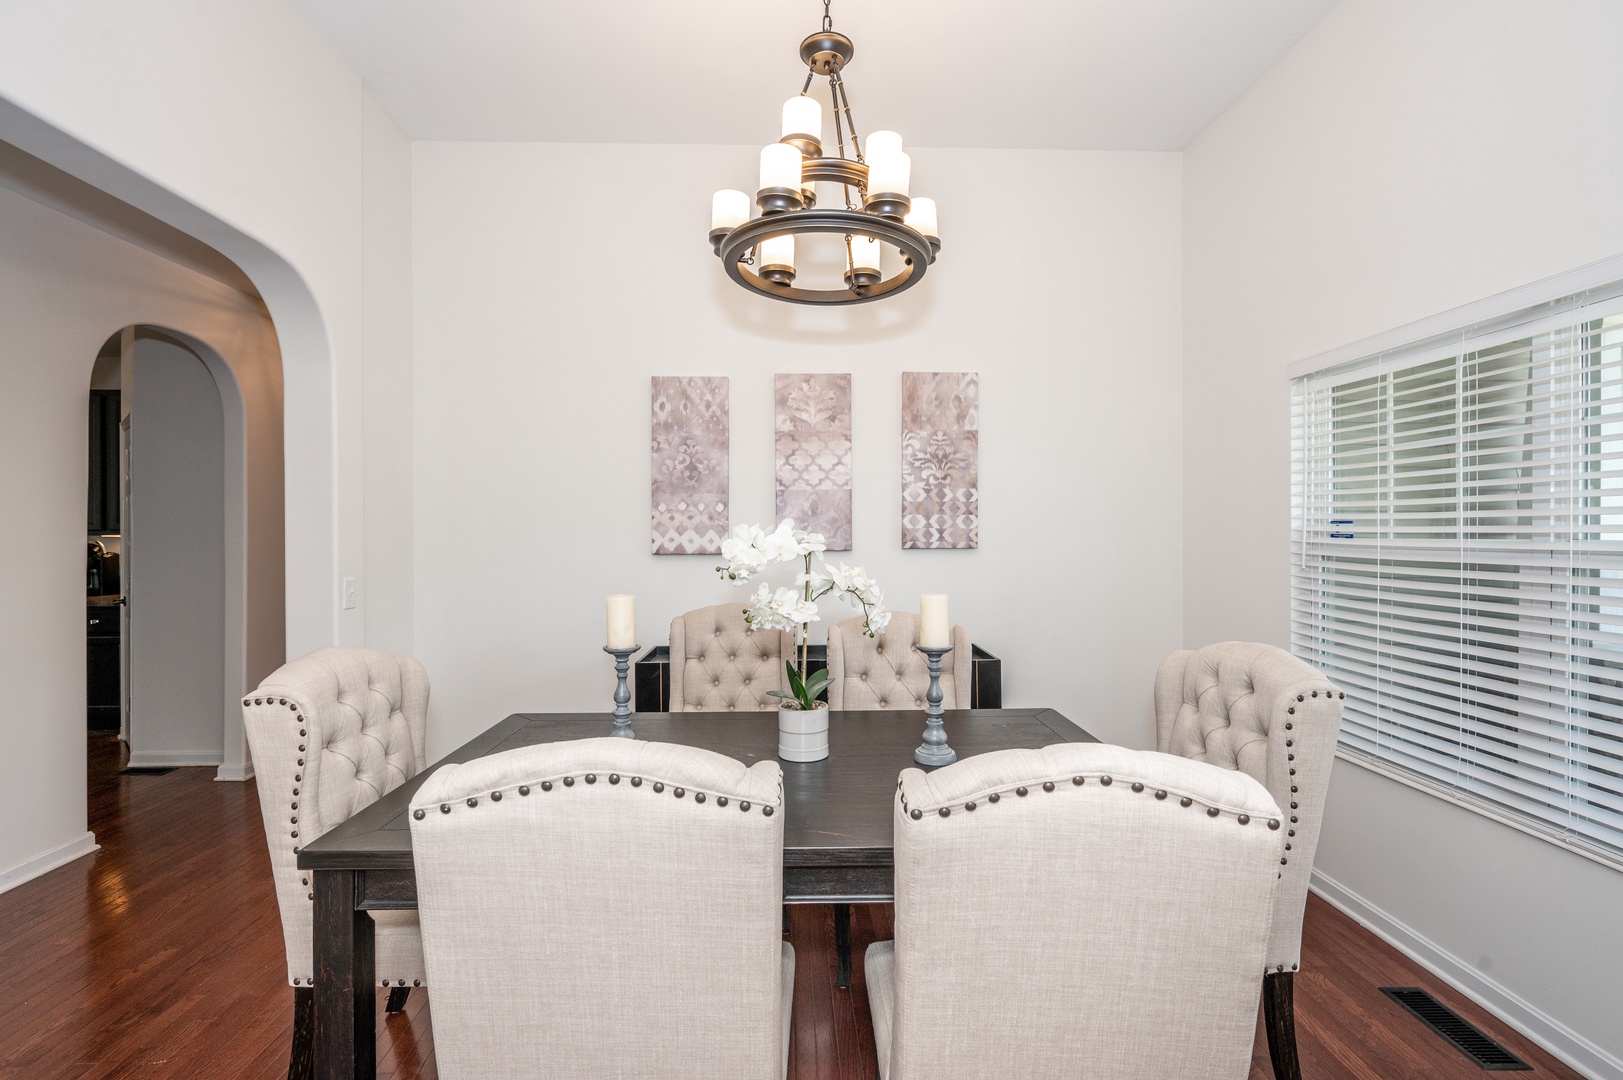 Elegant meals can be enjoyed in the formal dining room, with seating for 6